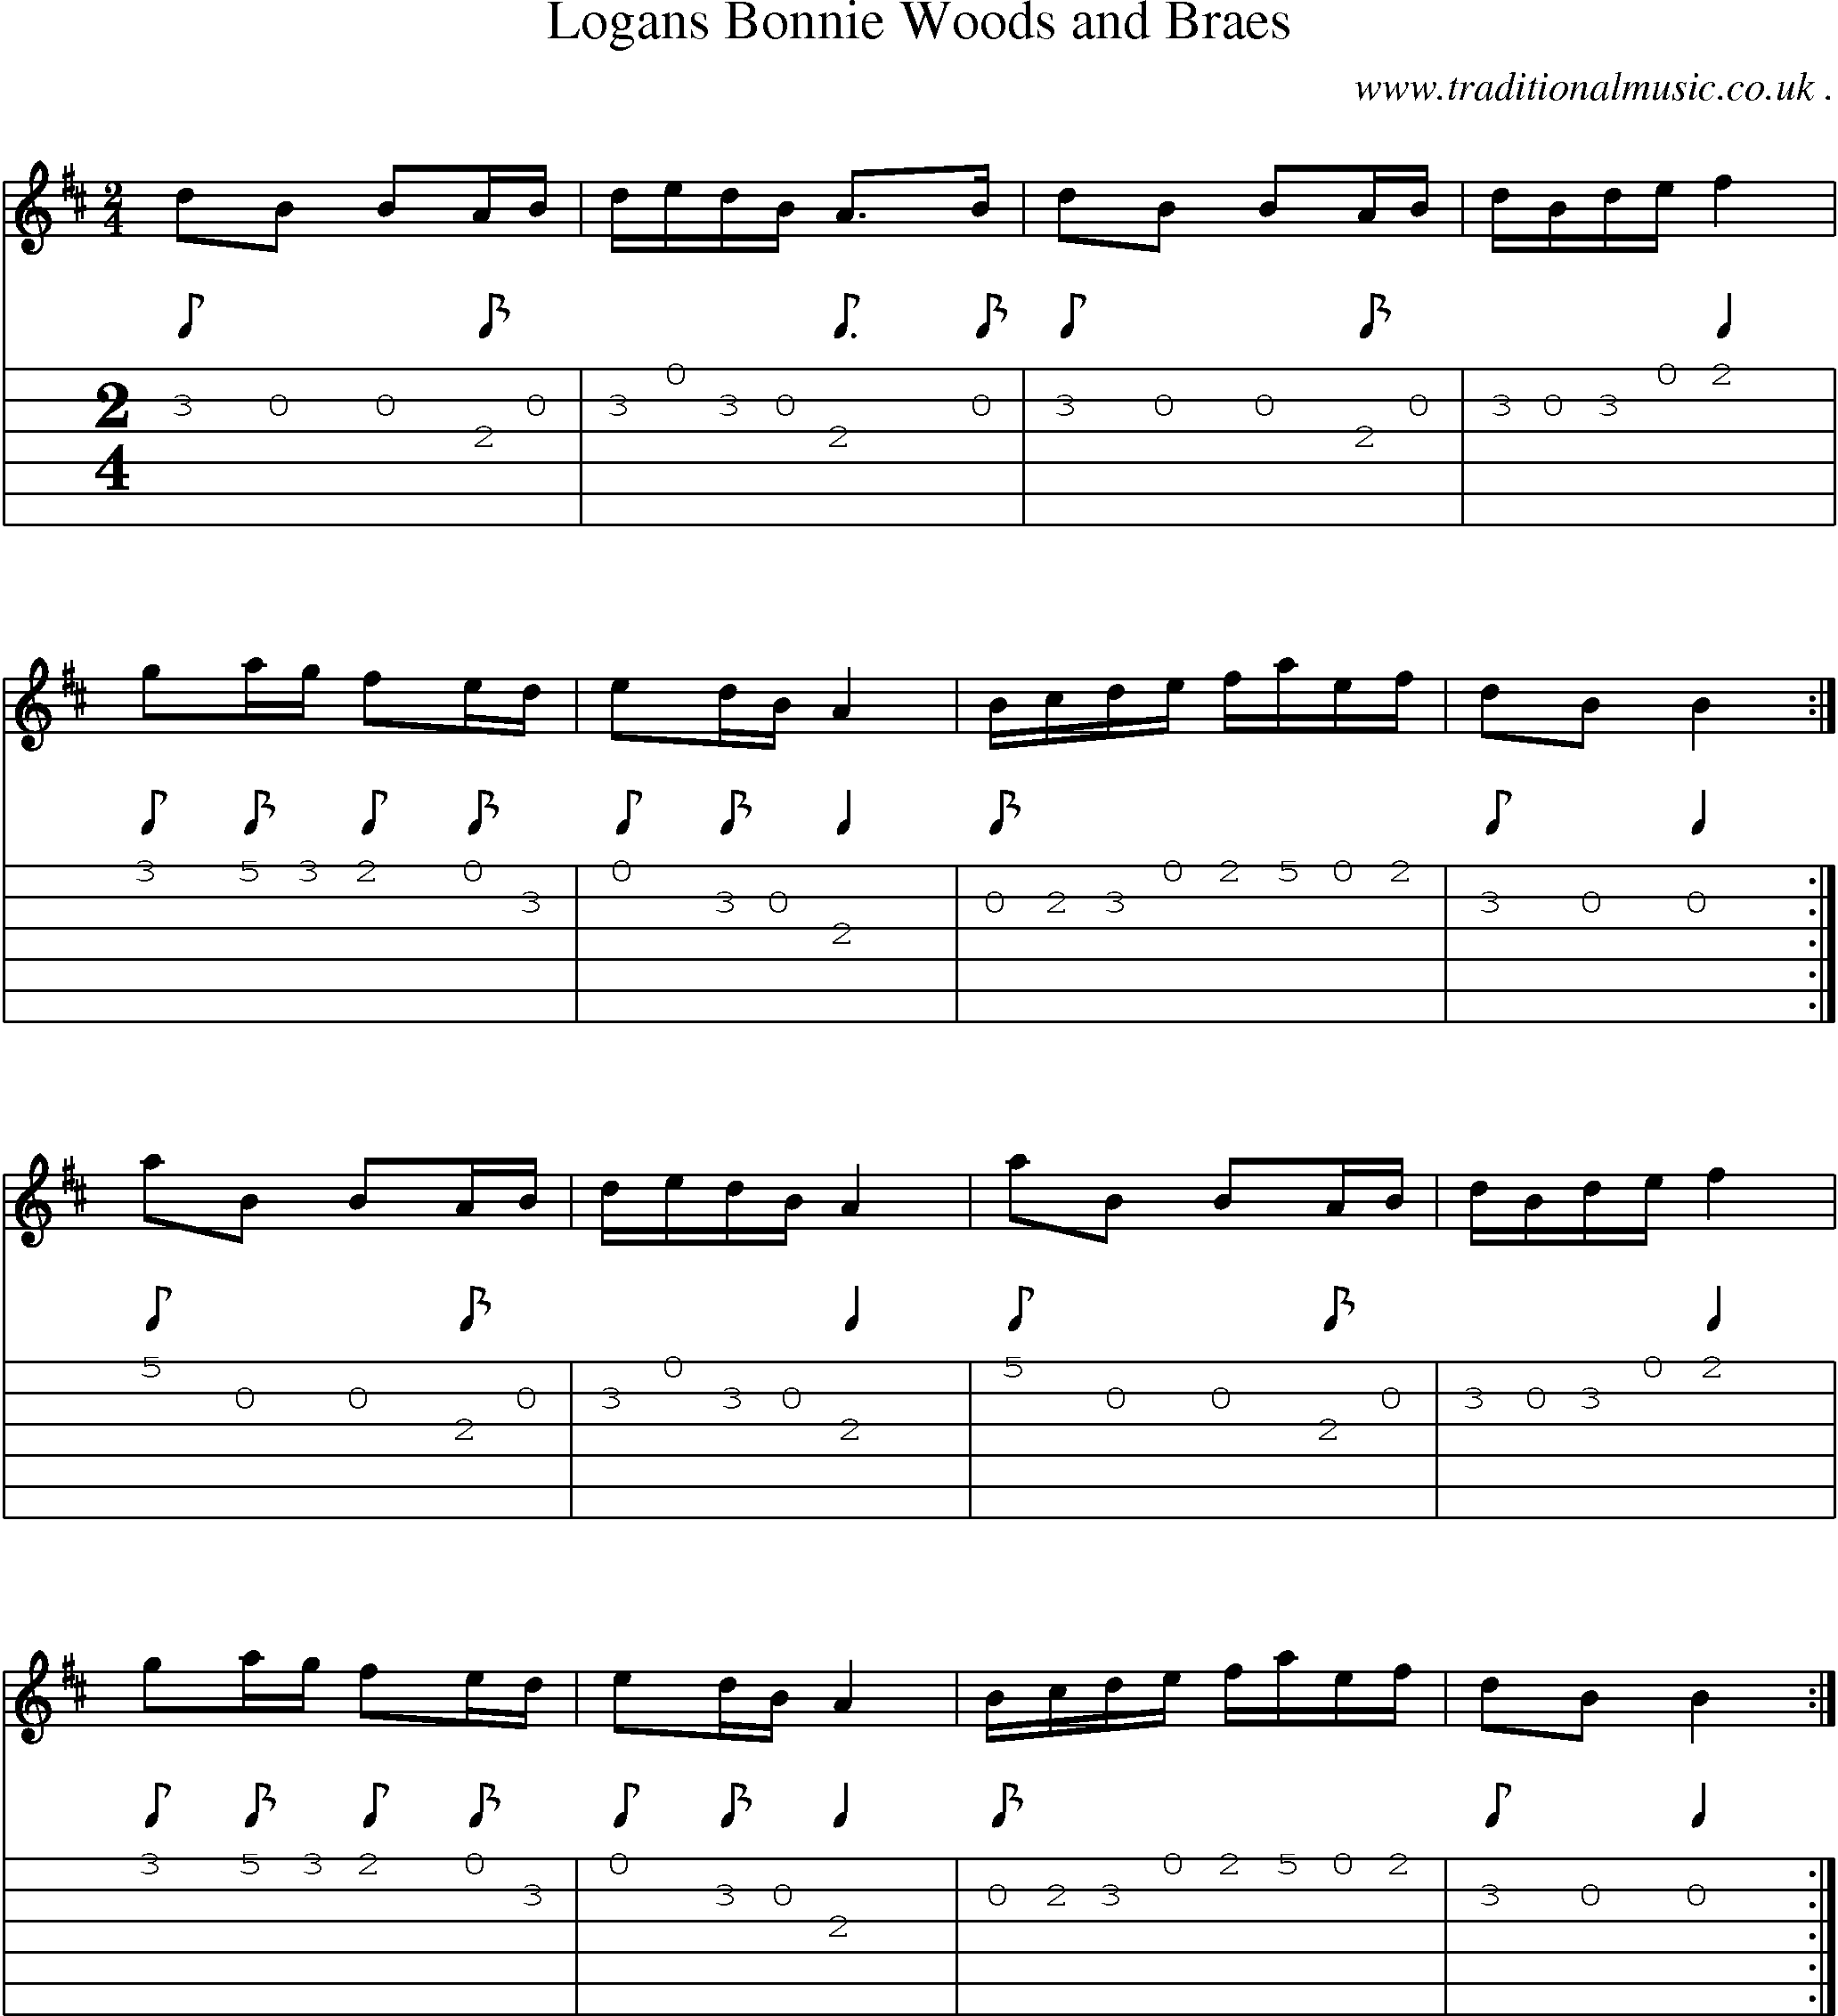 Sheet-music  score, Chords and Guitar Tabs for Logans Bonnie Woods And Braes